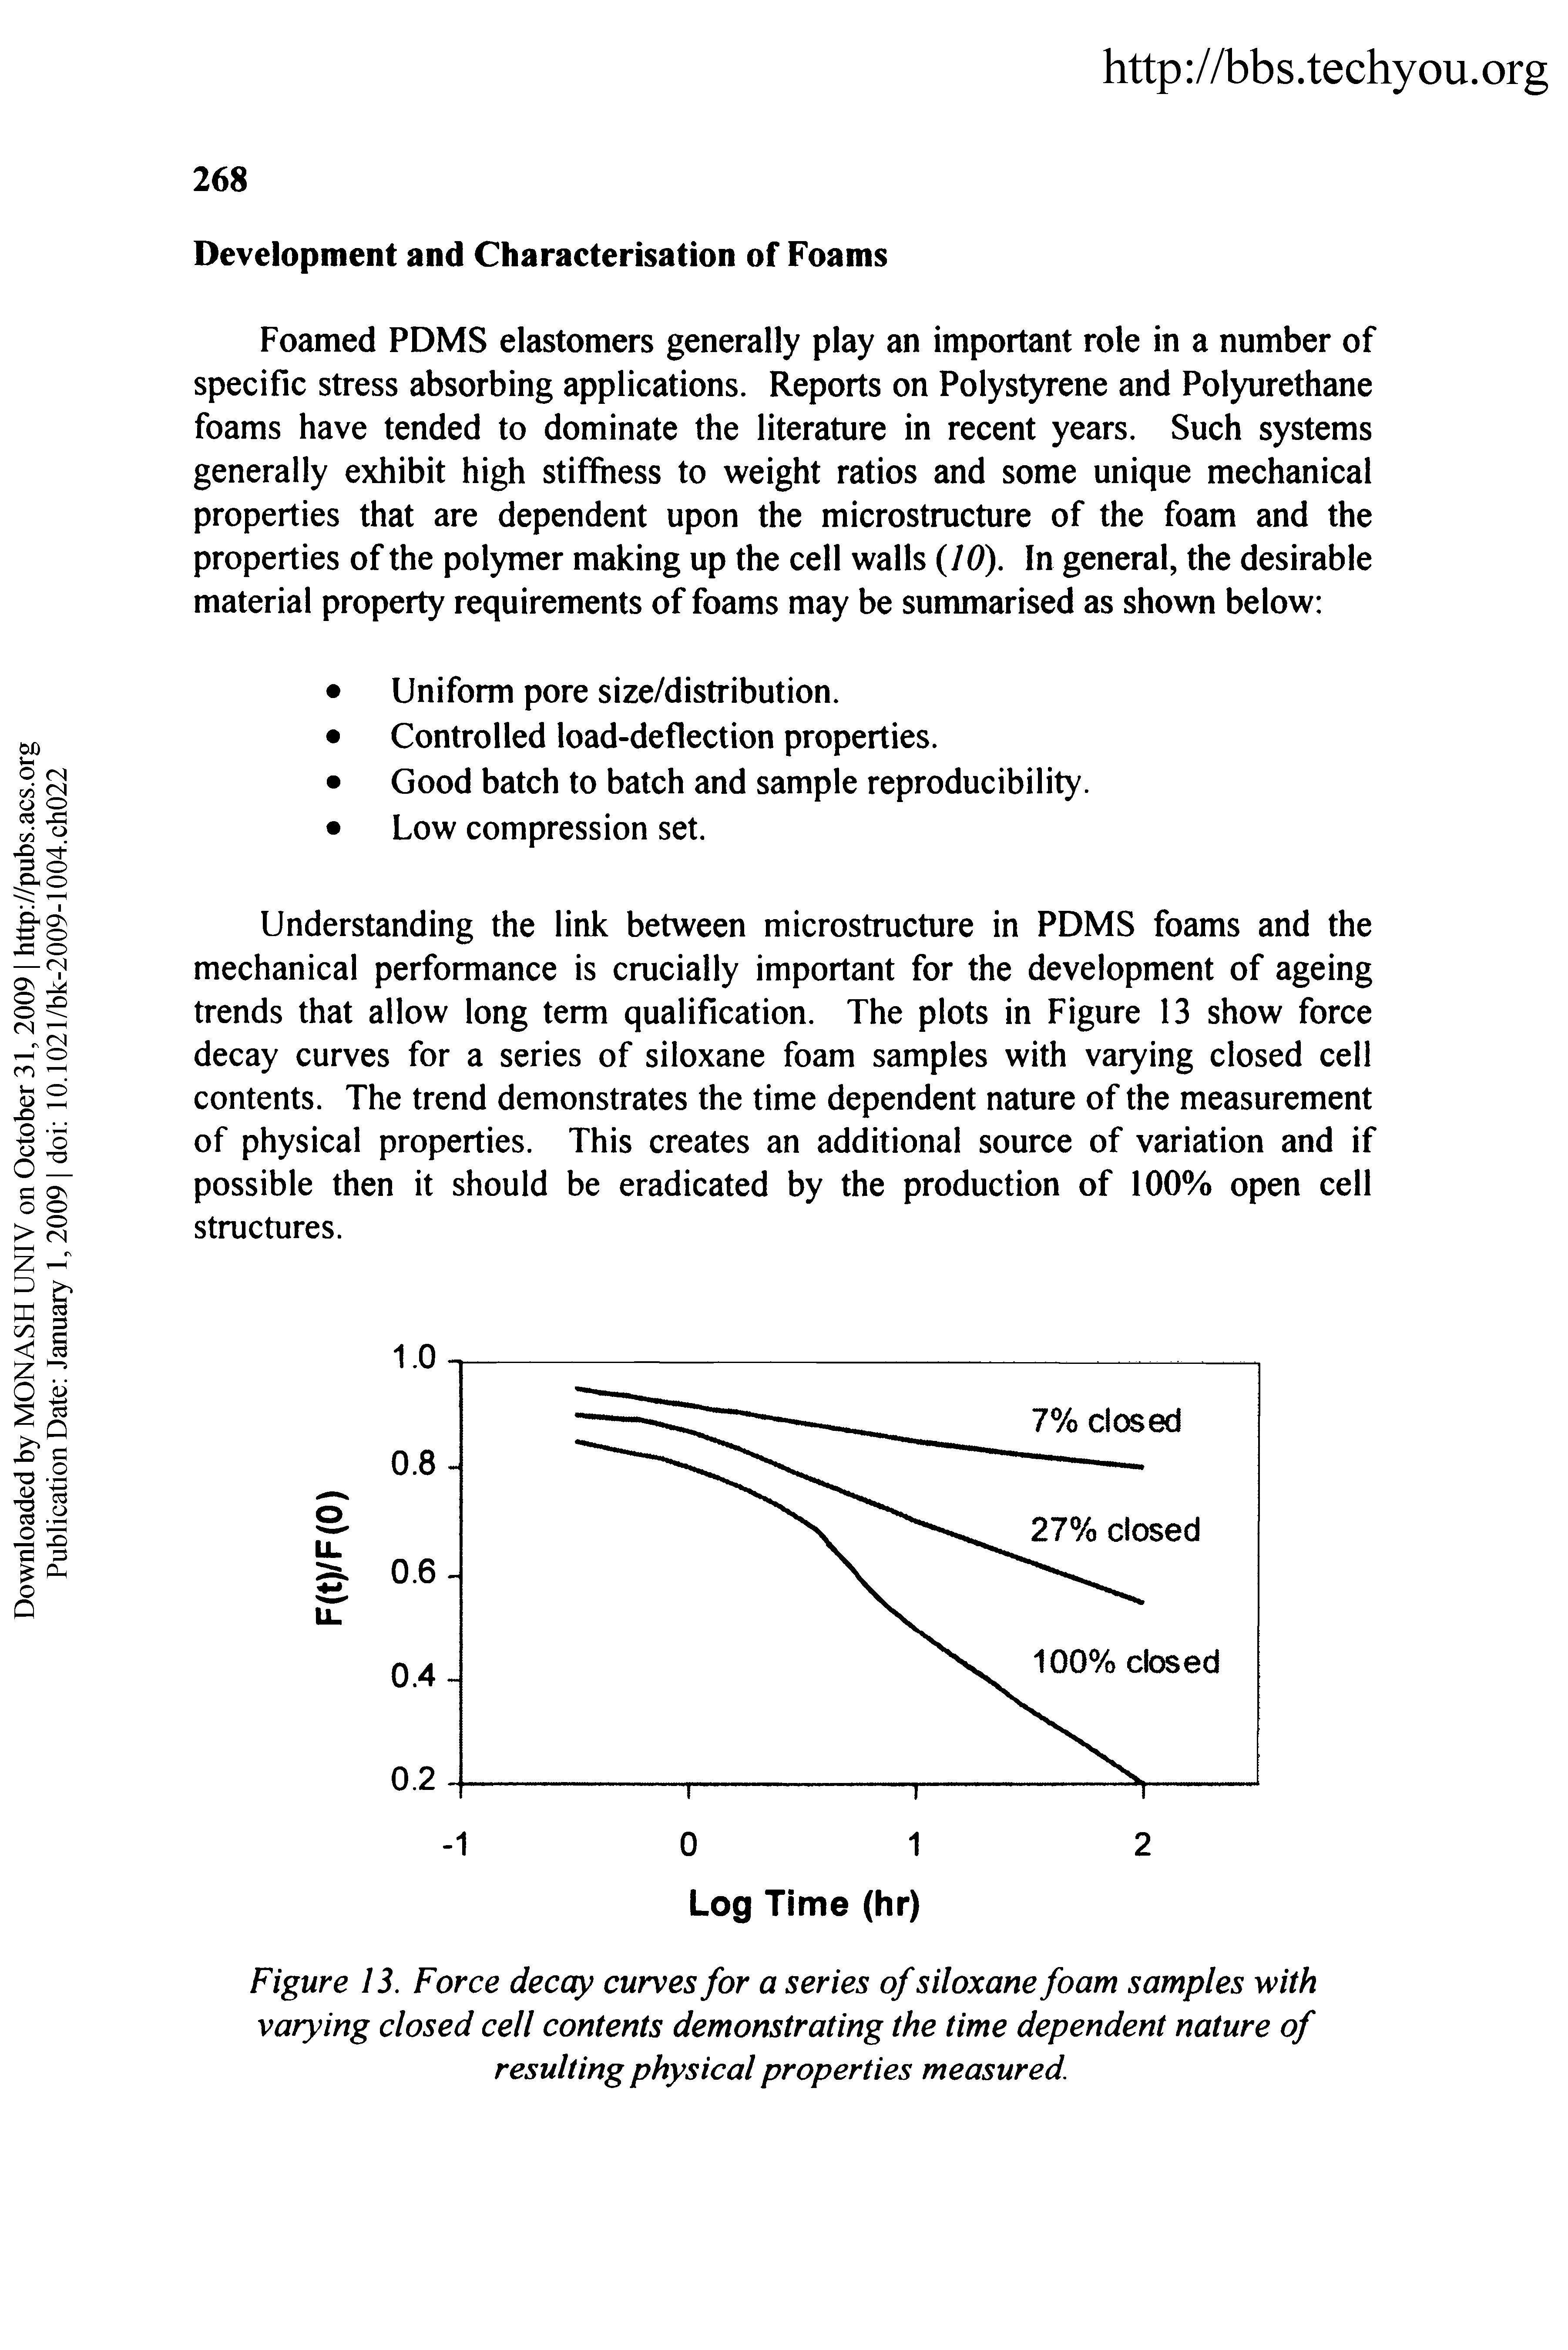 Figure 13. Force decay curves for a series of siloxane foam samples with varying closed cell contents demonstrating the time dependent nature of resulting physical properties measured.